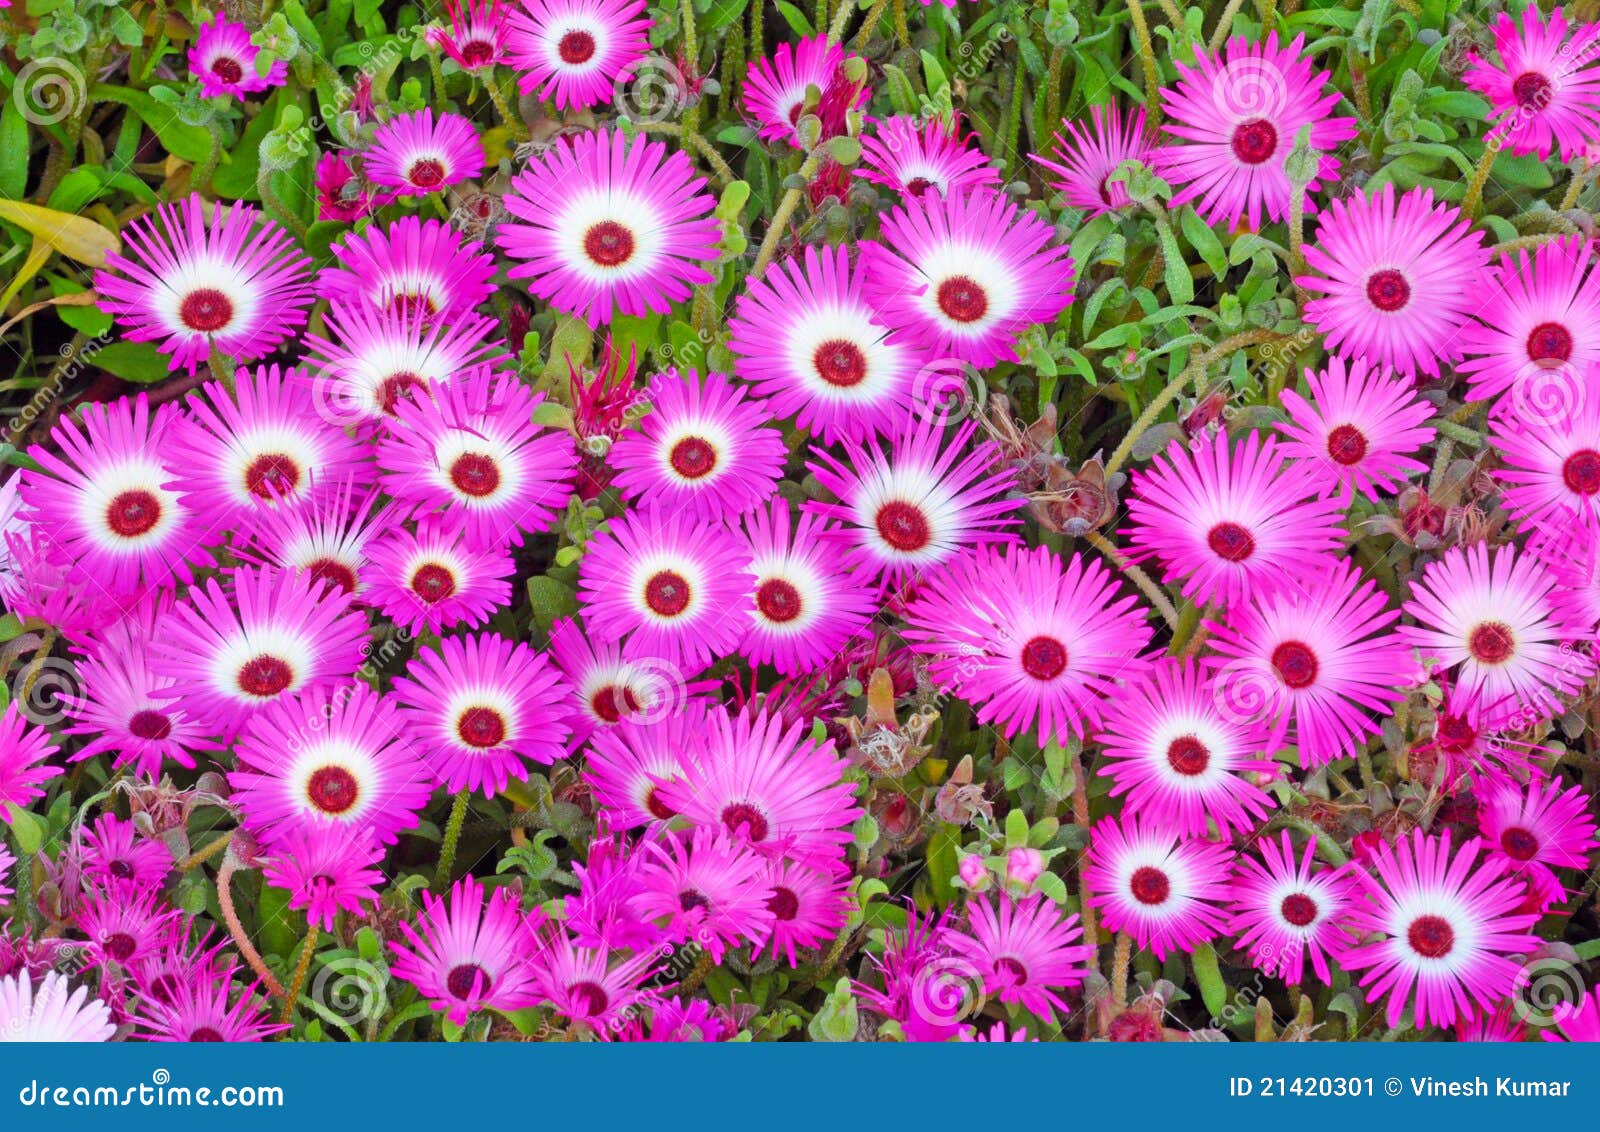 333 Flower Bed Ice Plant Photos Free Royalty Free Stock Photos From Dreamstime